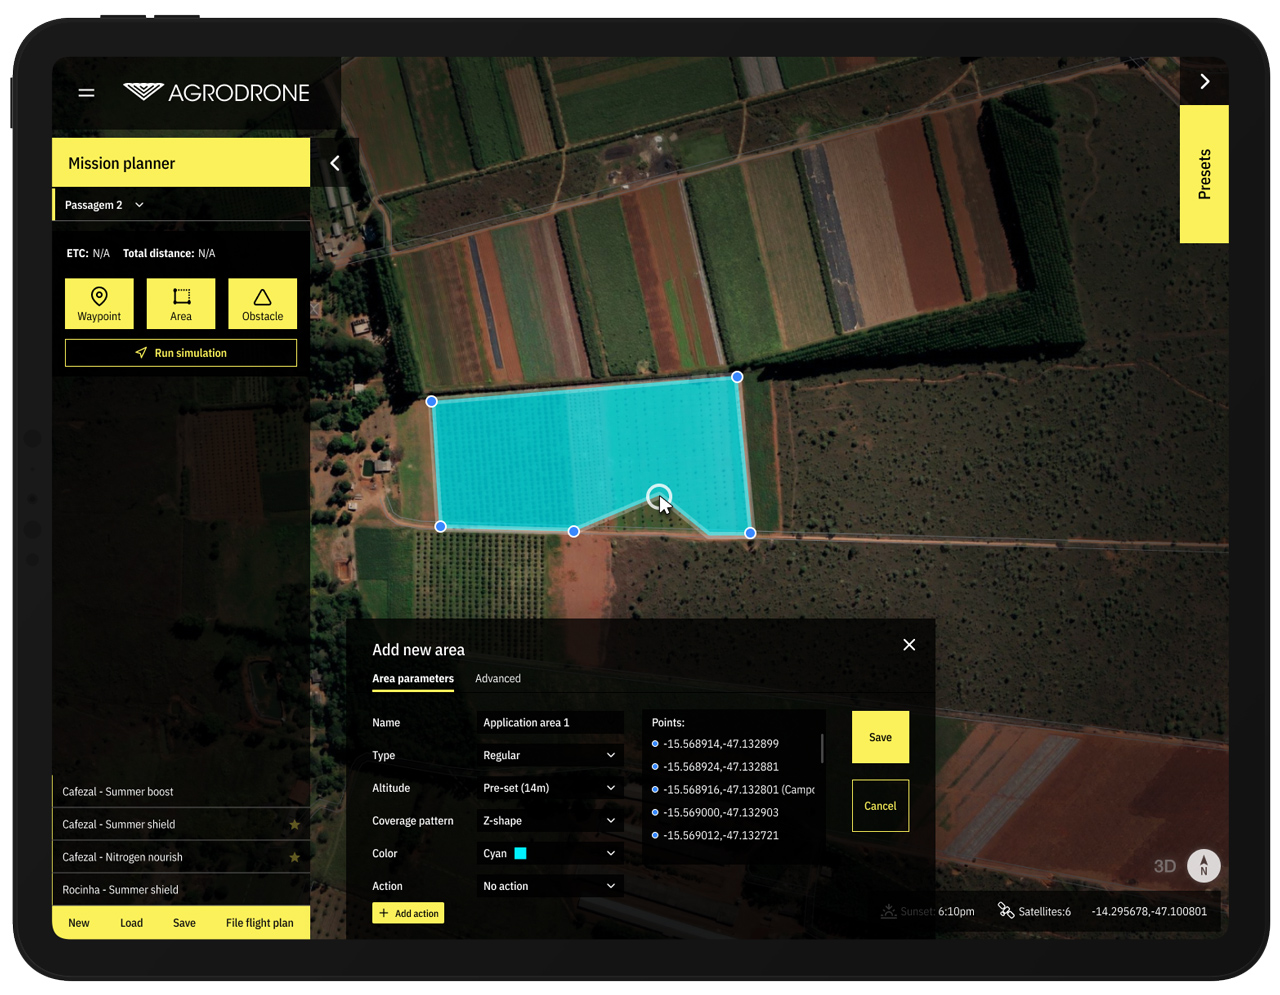 Agrodrone crop dust with drones app on an iPad - adding a new area